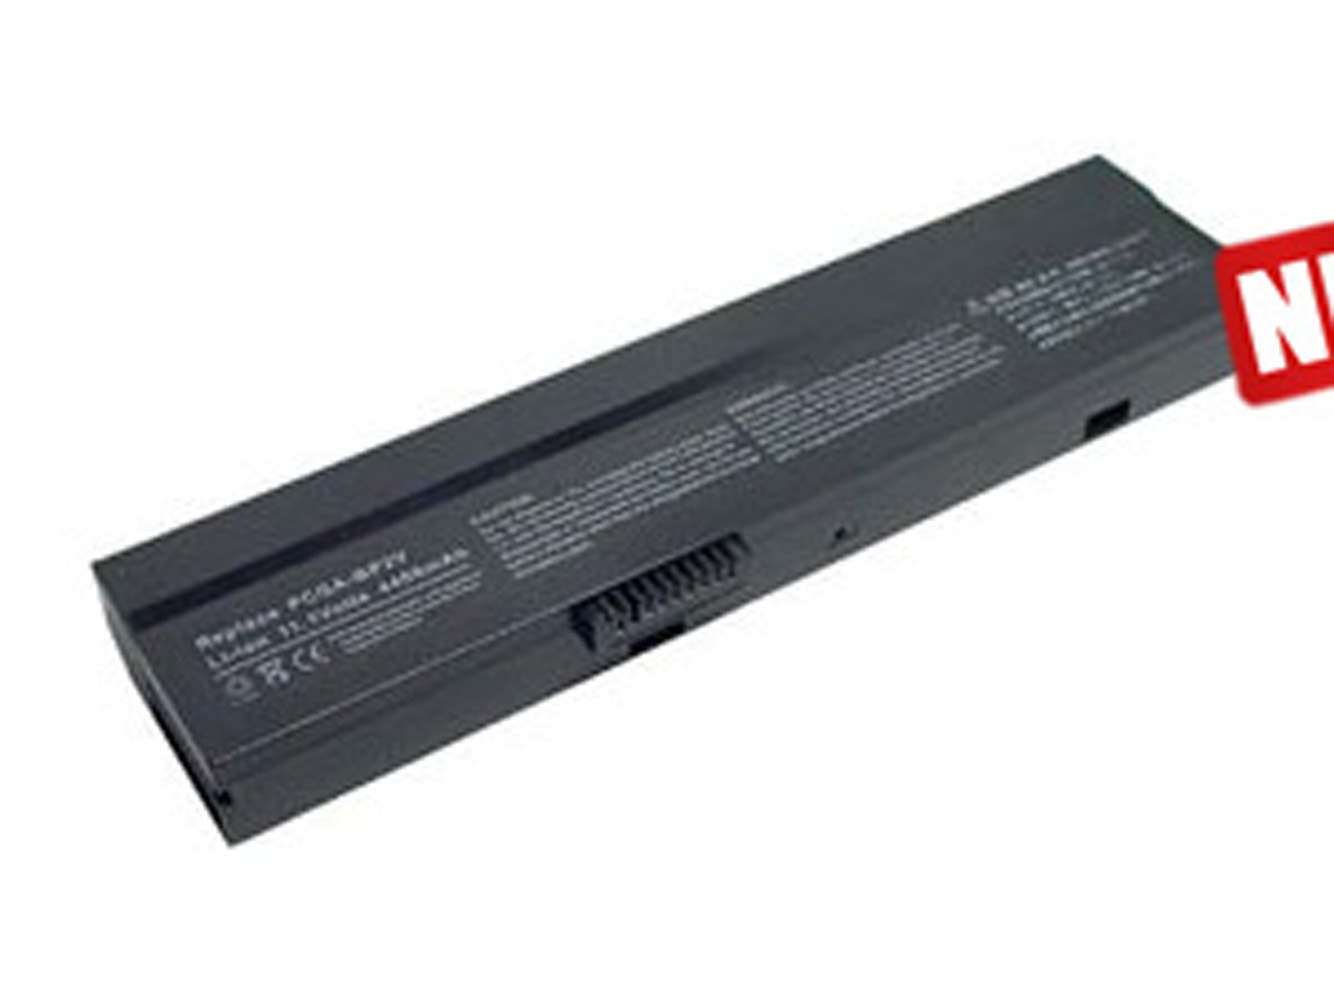 Replacement for SONY PCG-N-B90PSYA, SONY VAIO PCG-V505A, PCG-V505B, PCG-V505EC, PCG-V505, PCG-Z1, VGN-B Series Laptop Battery